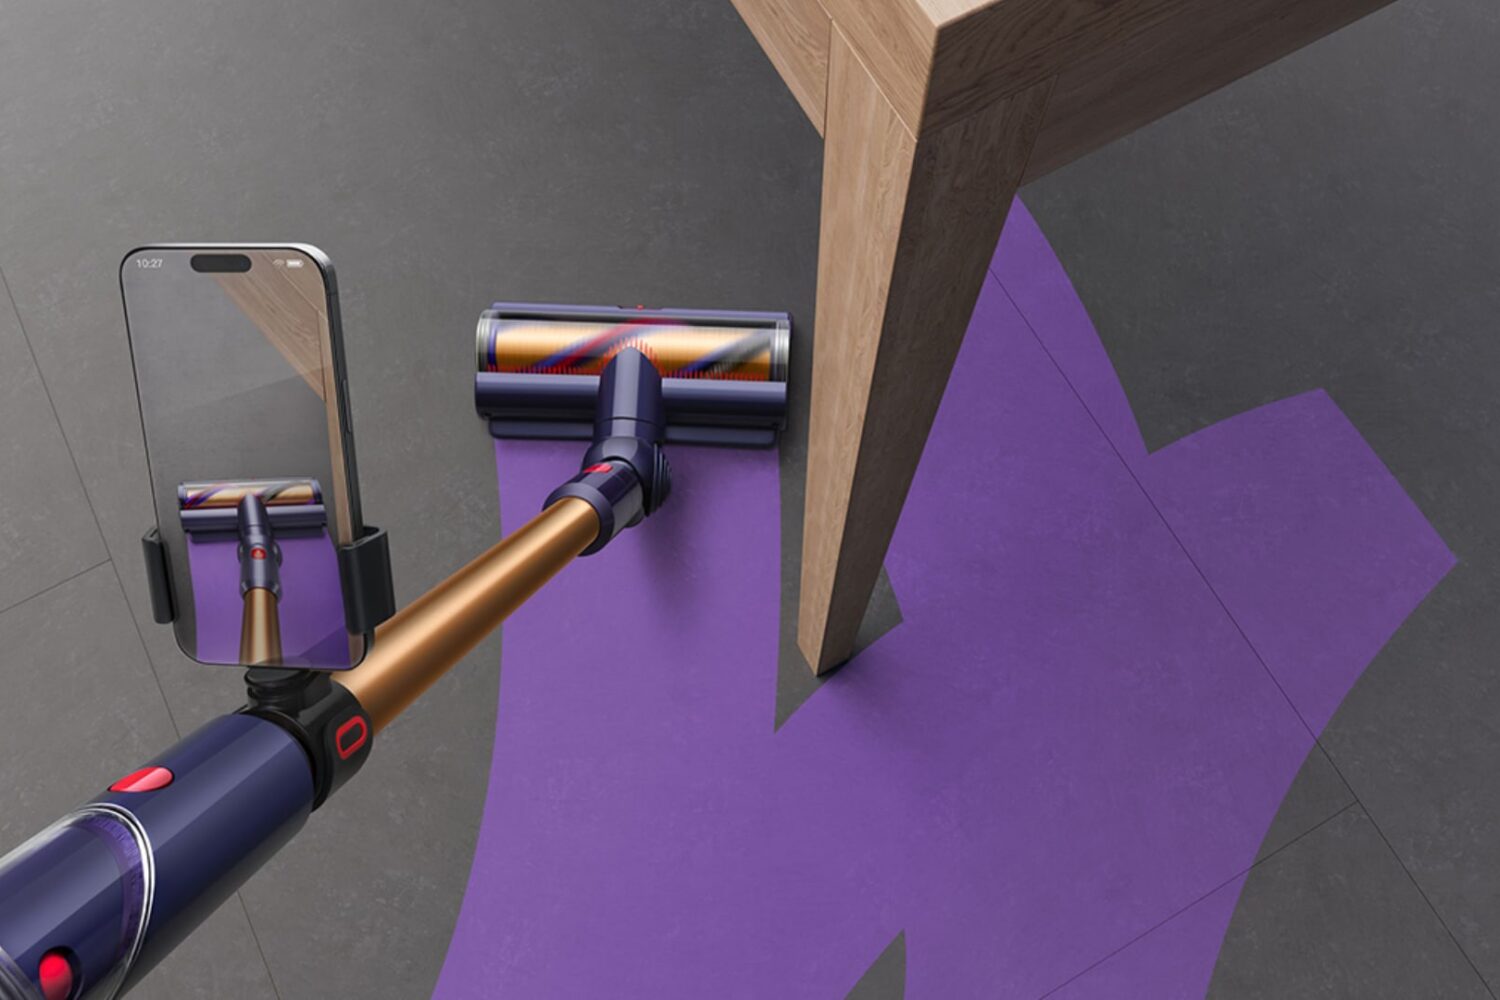 Top down view showing iPhone attached to a Dyson vacuum cleaner and mapping the room